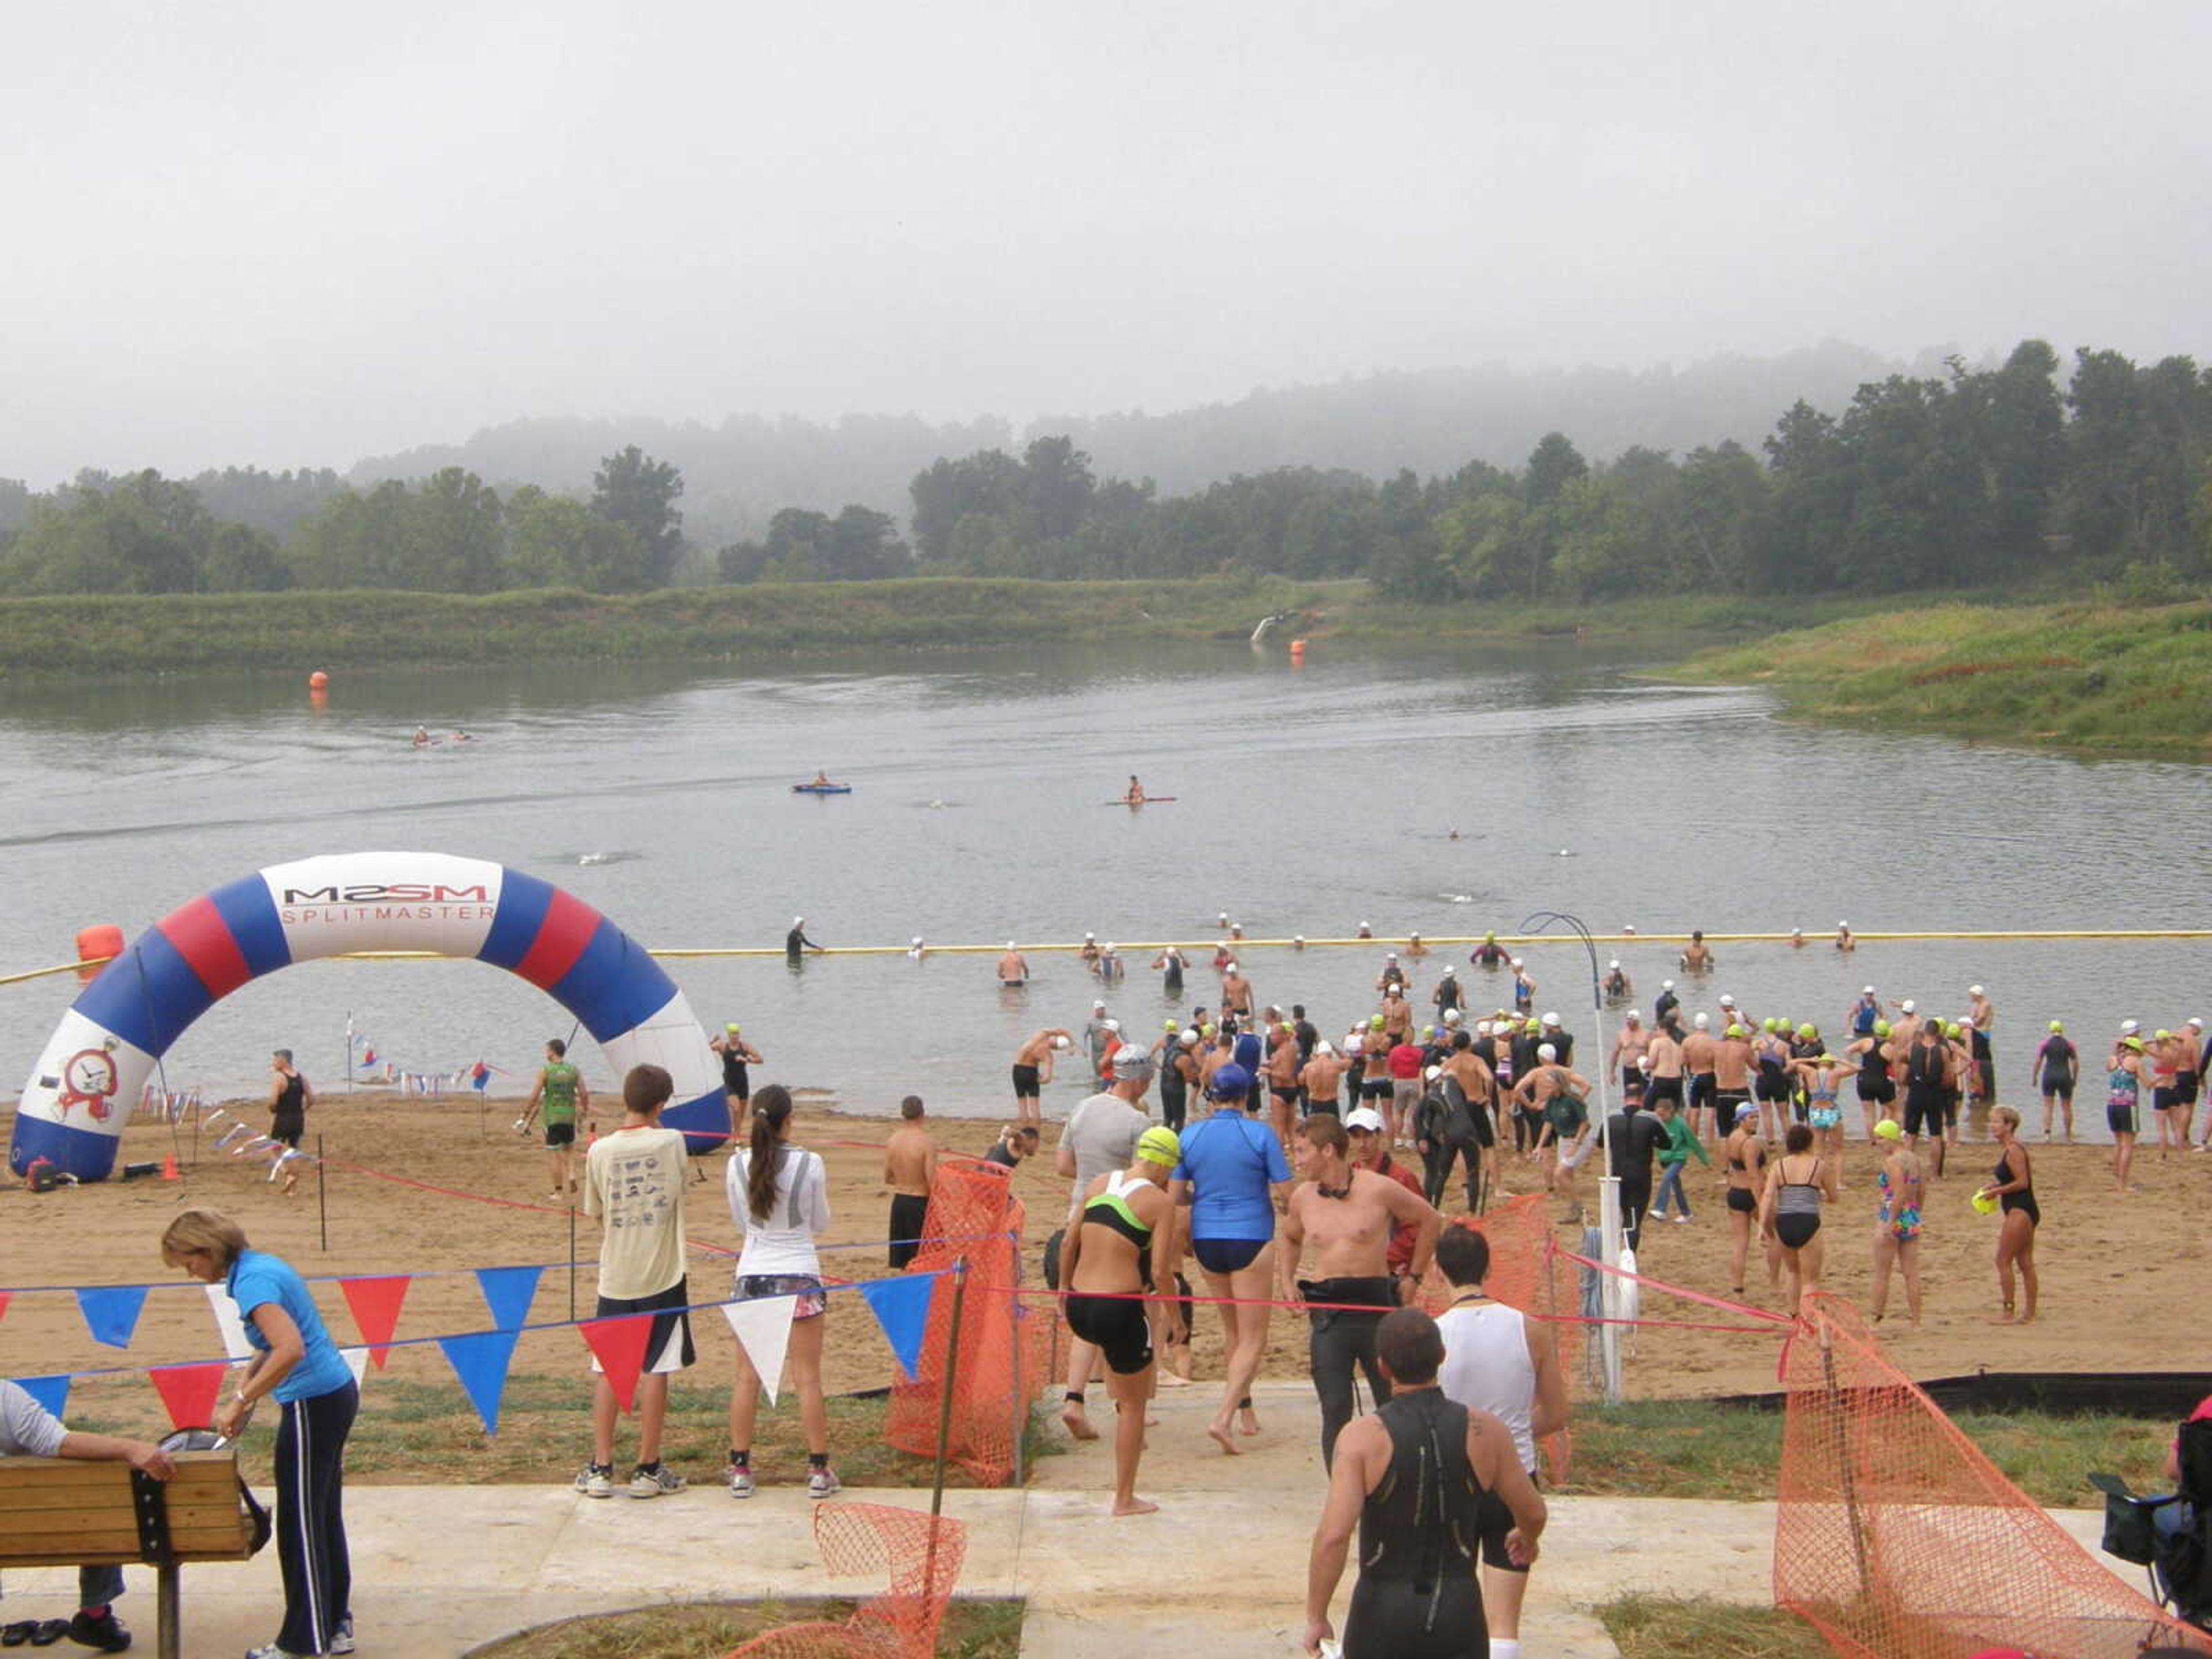 Participants line up to begin the 
swimming portion of the Trail of Tears Triathlon. - Submitted photo